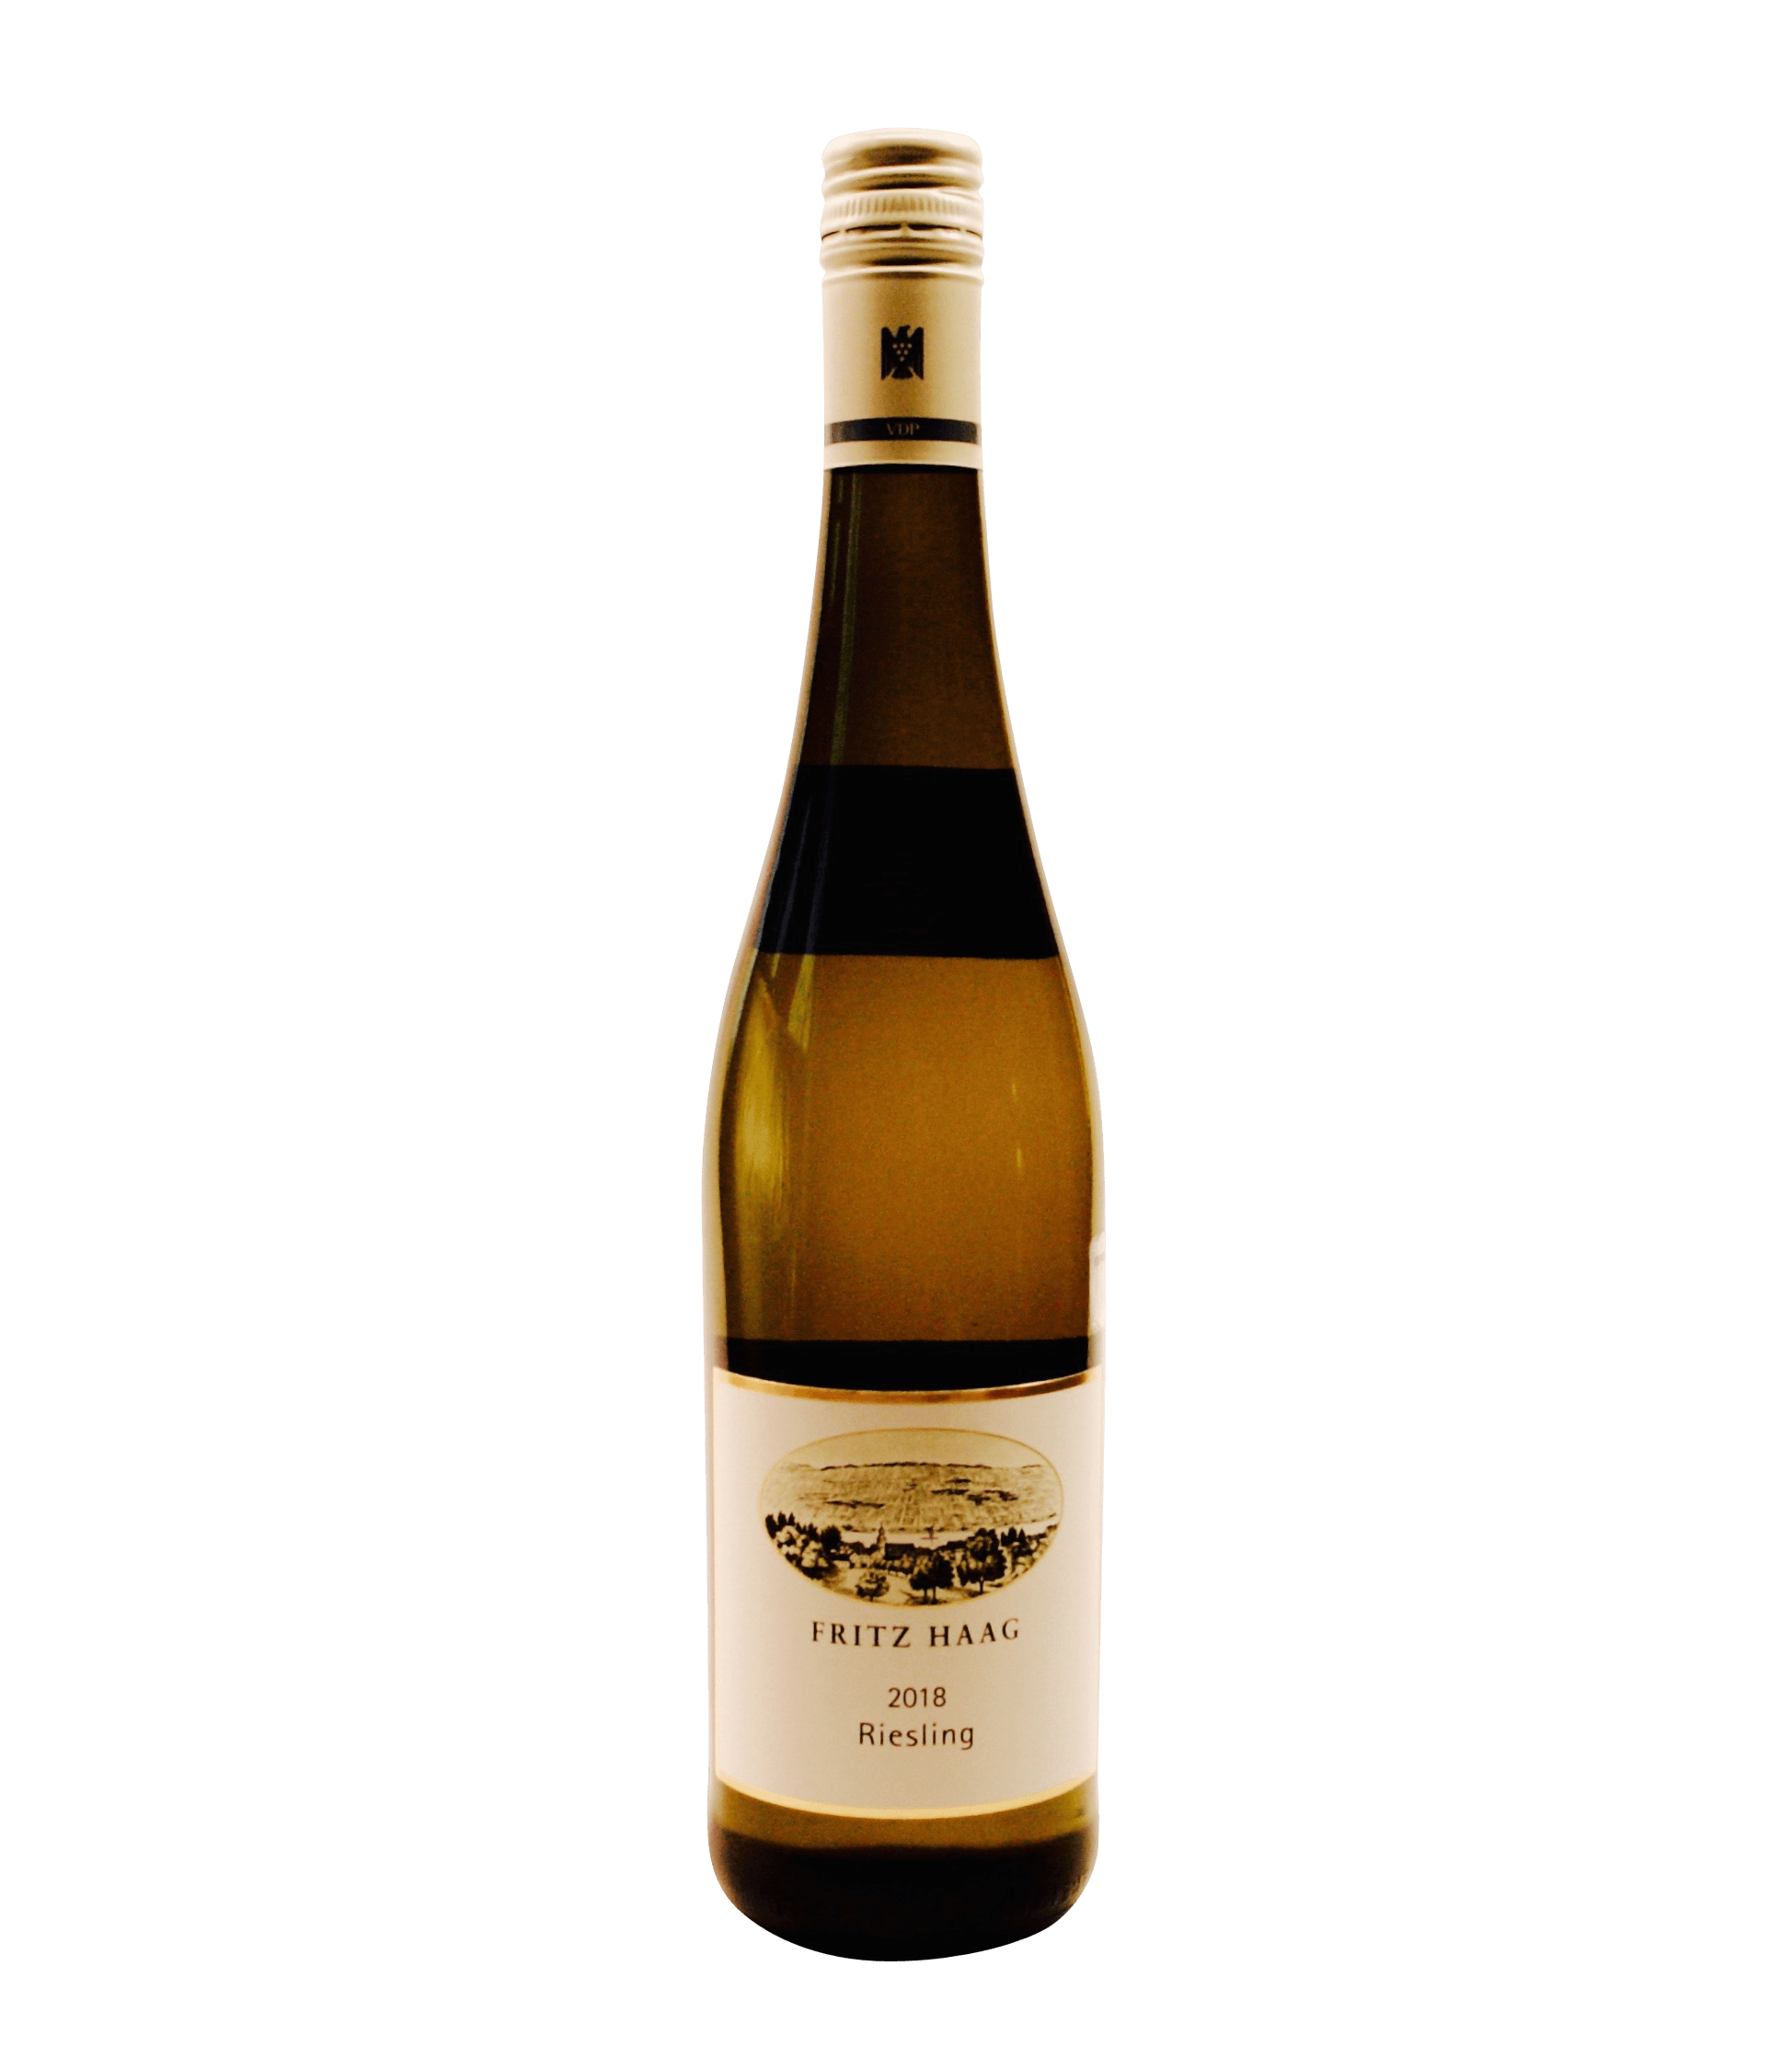 FRITZ HAAG Riesling 2018